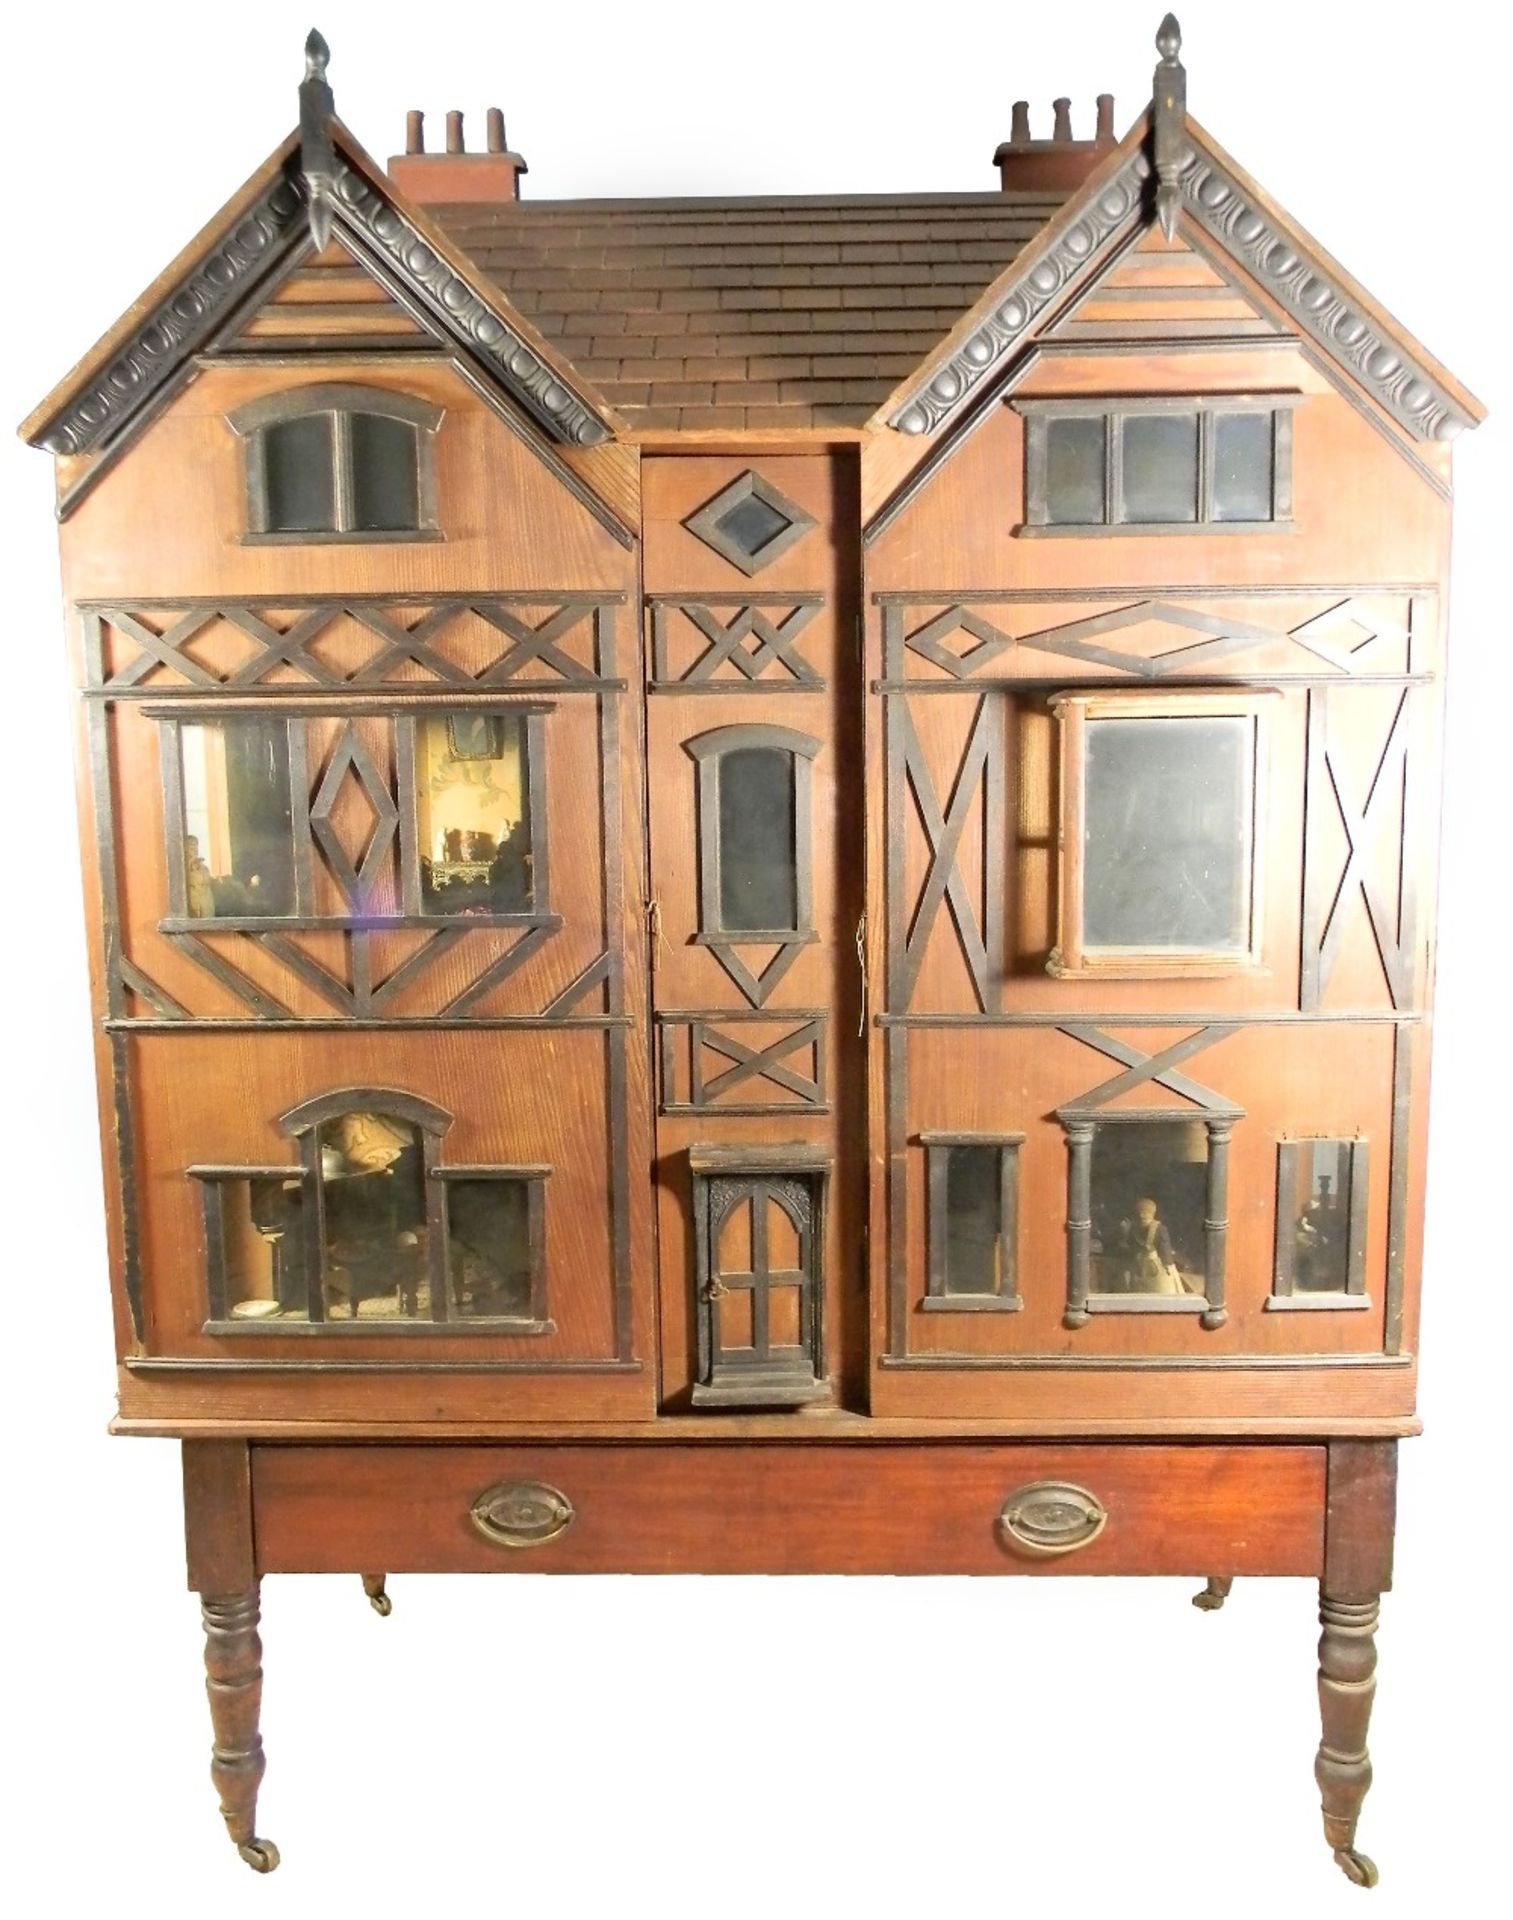 A large and impressive wooden dolls house and contents on stand, probably German circa 1880,